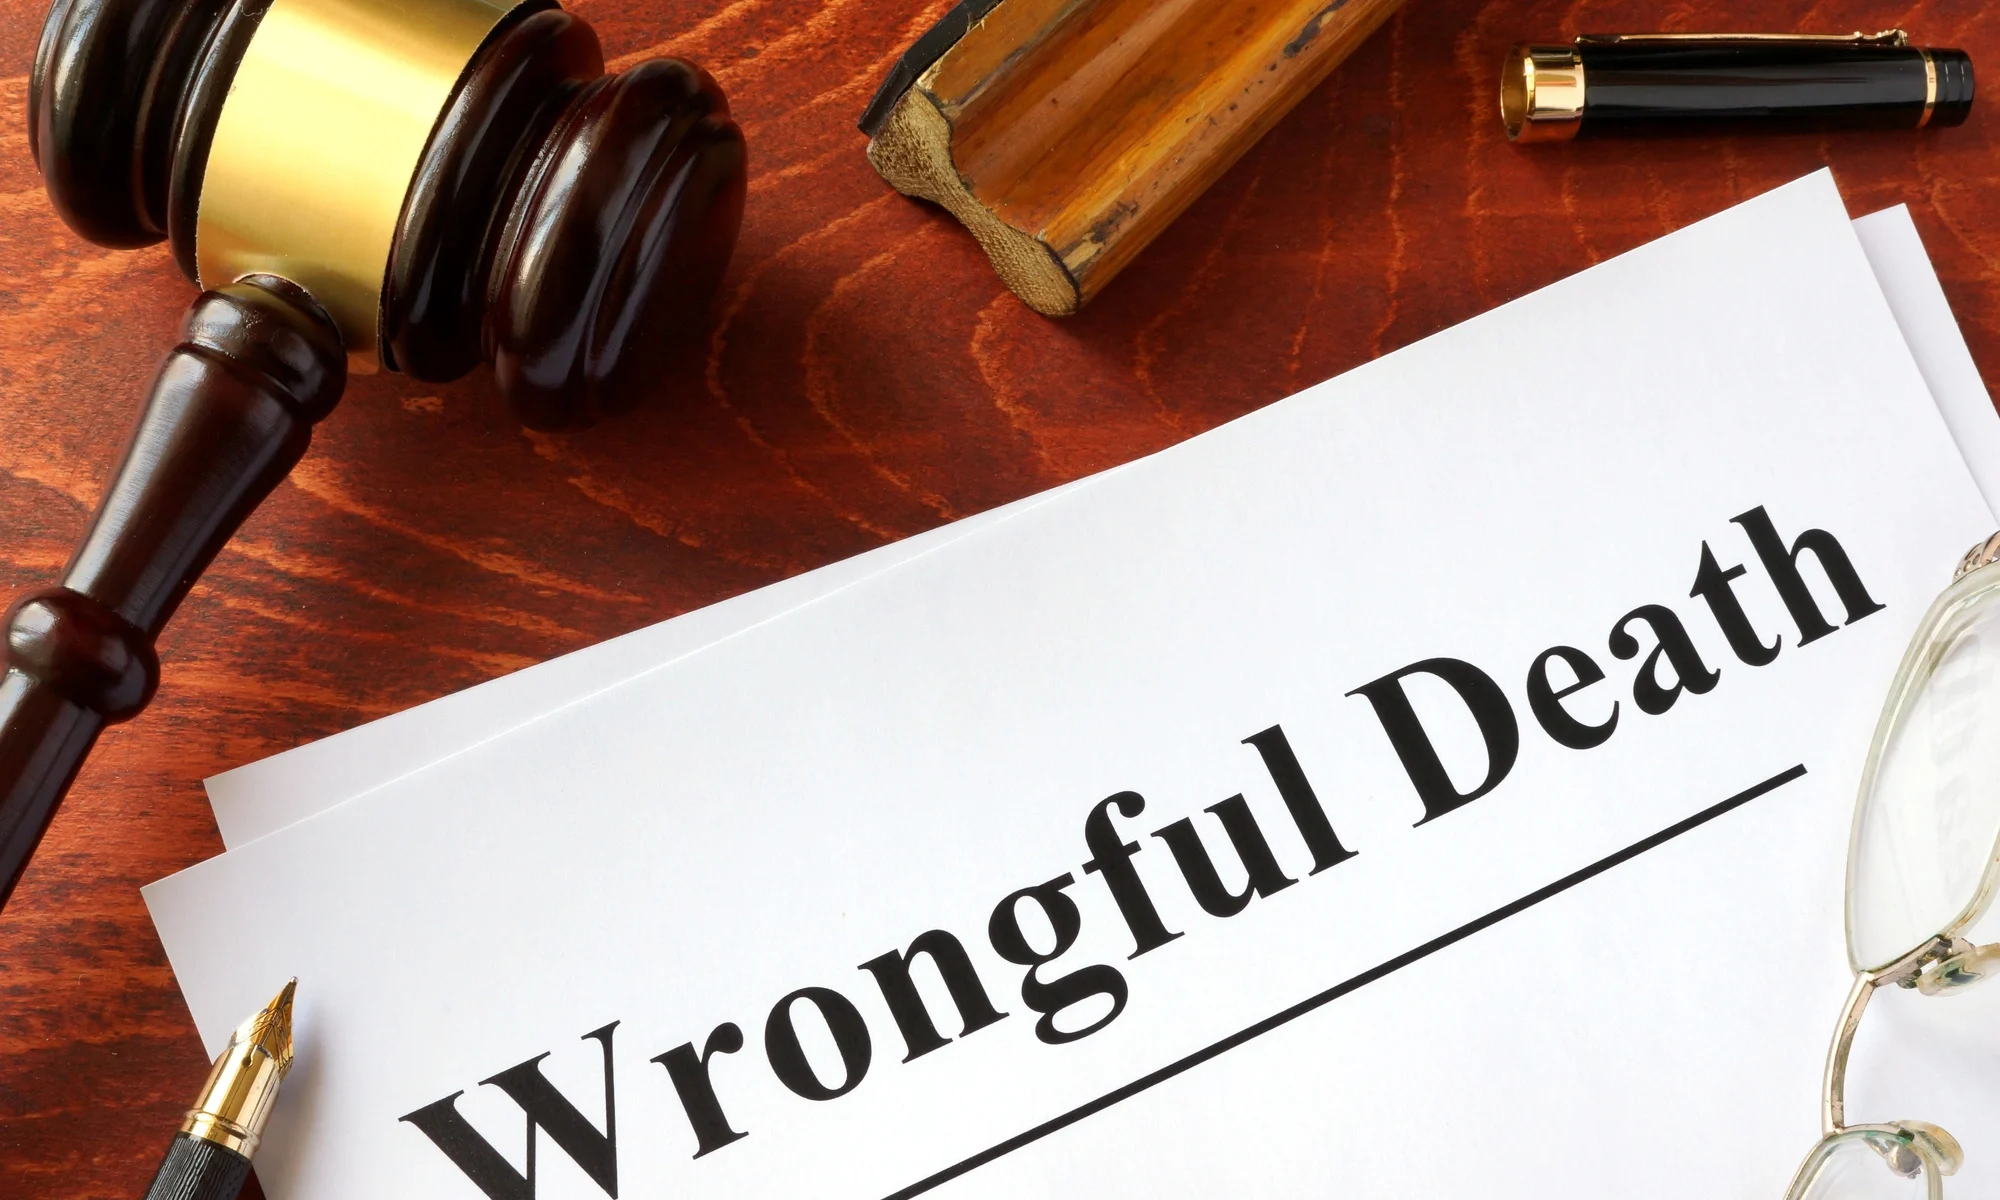 Who Can Sue for Wrongful Death